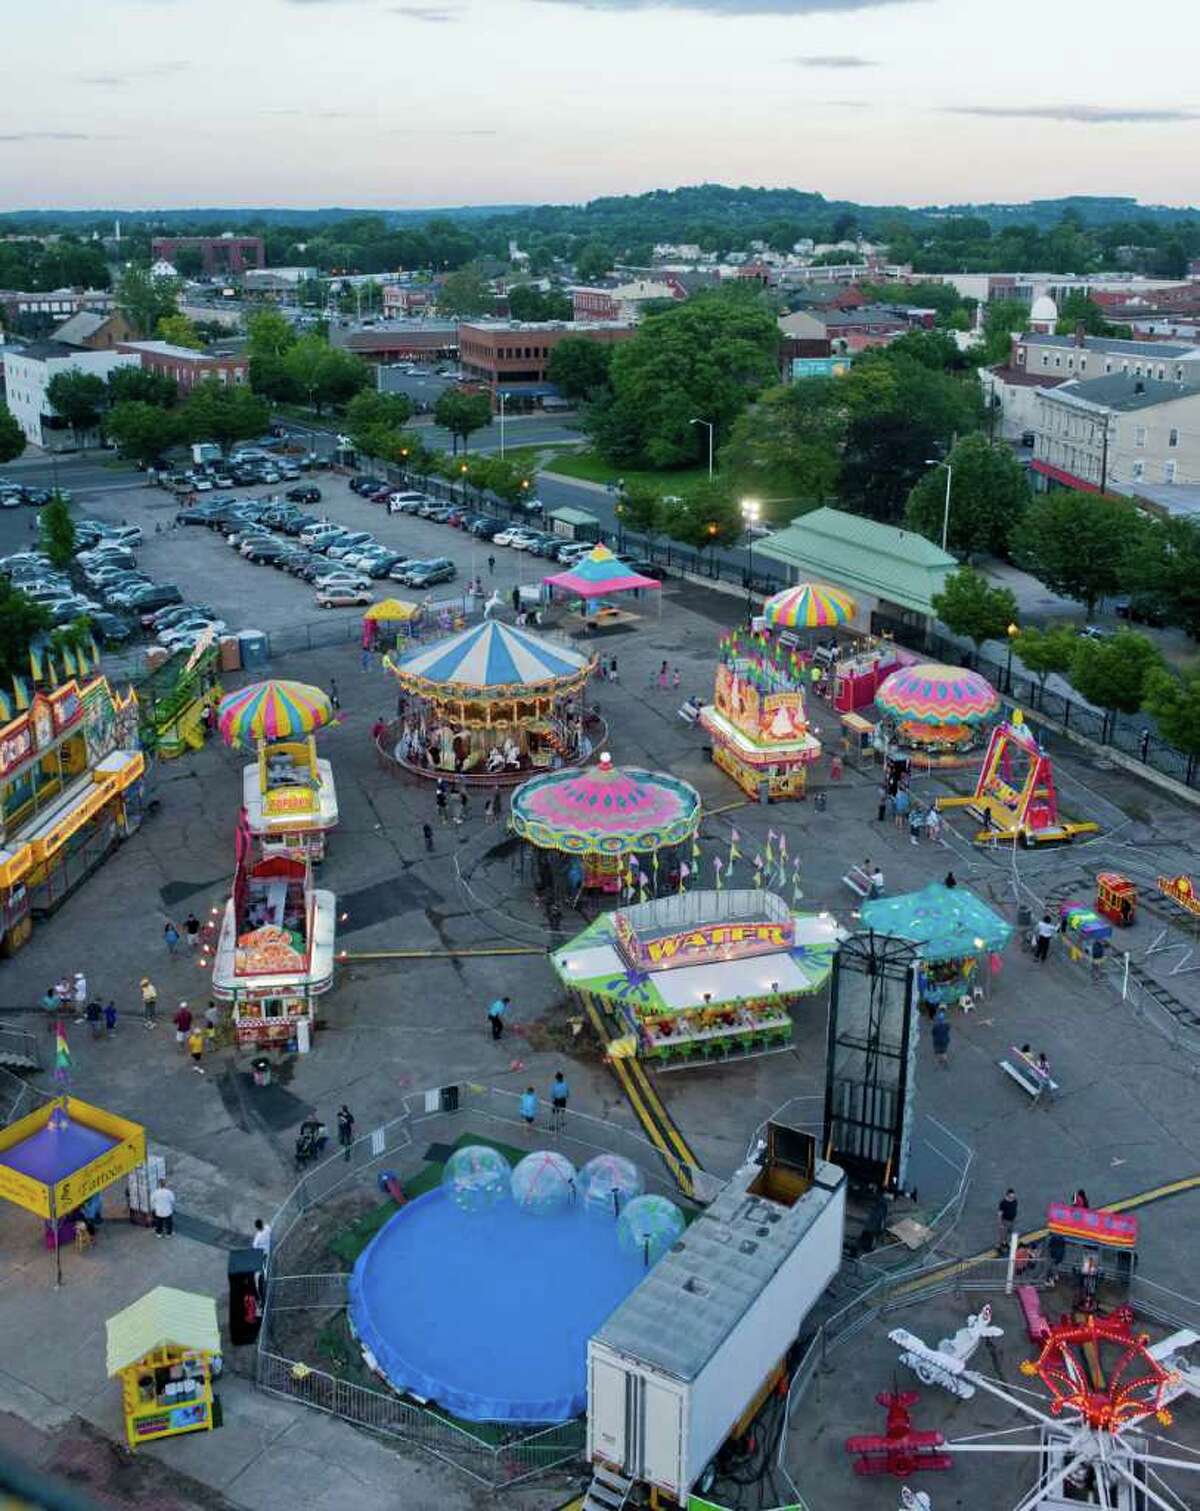 Step right up Carnival days continue in Danbury